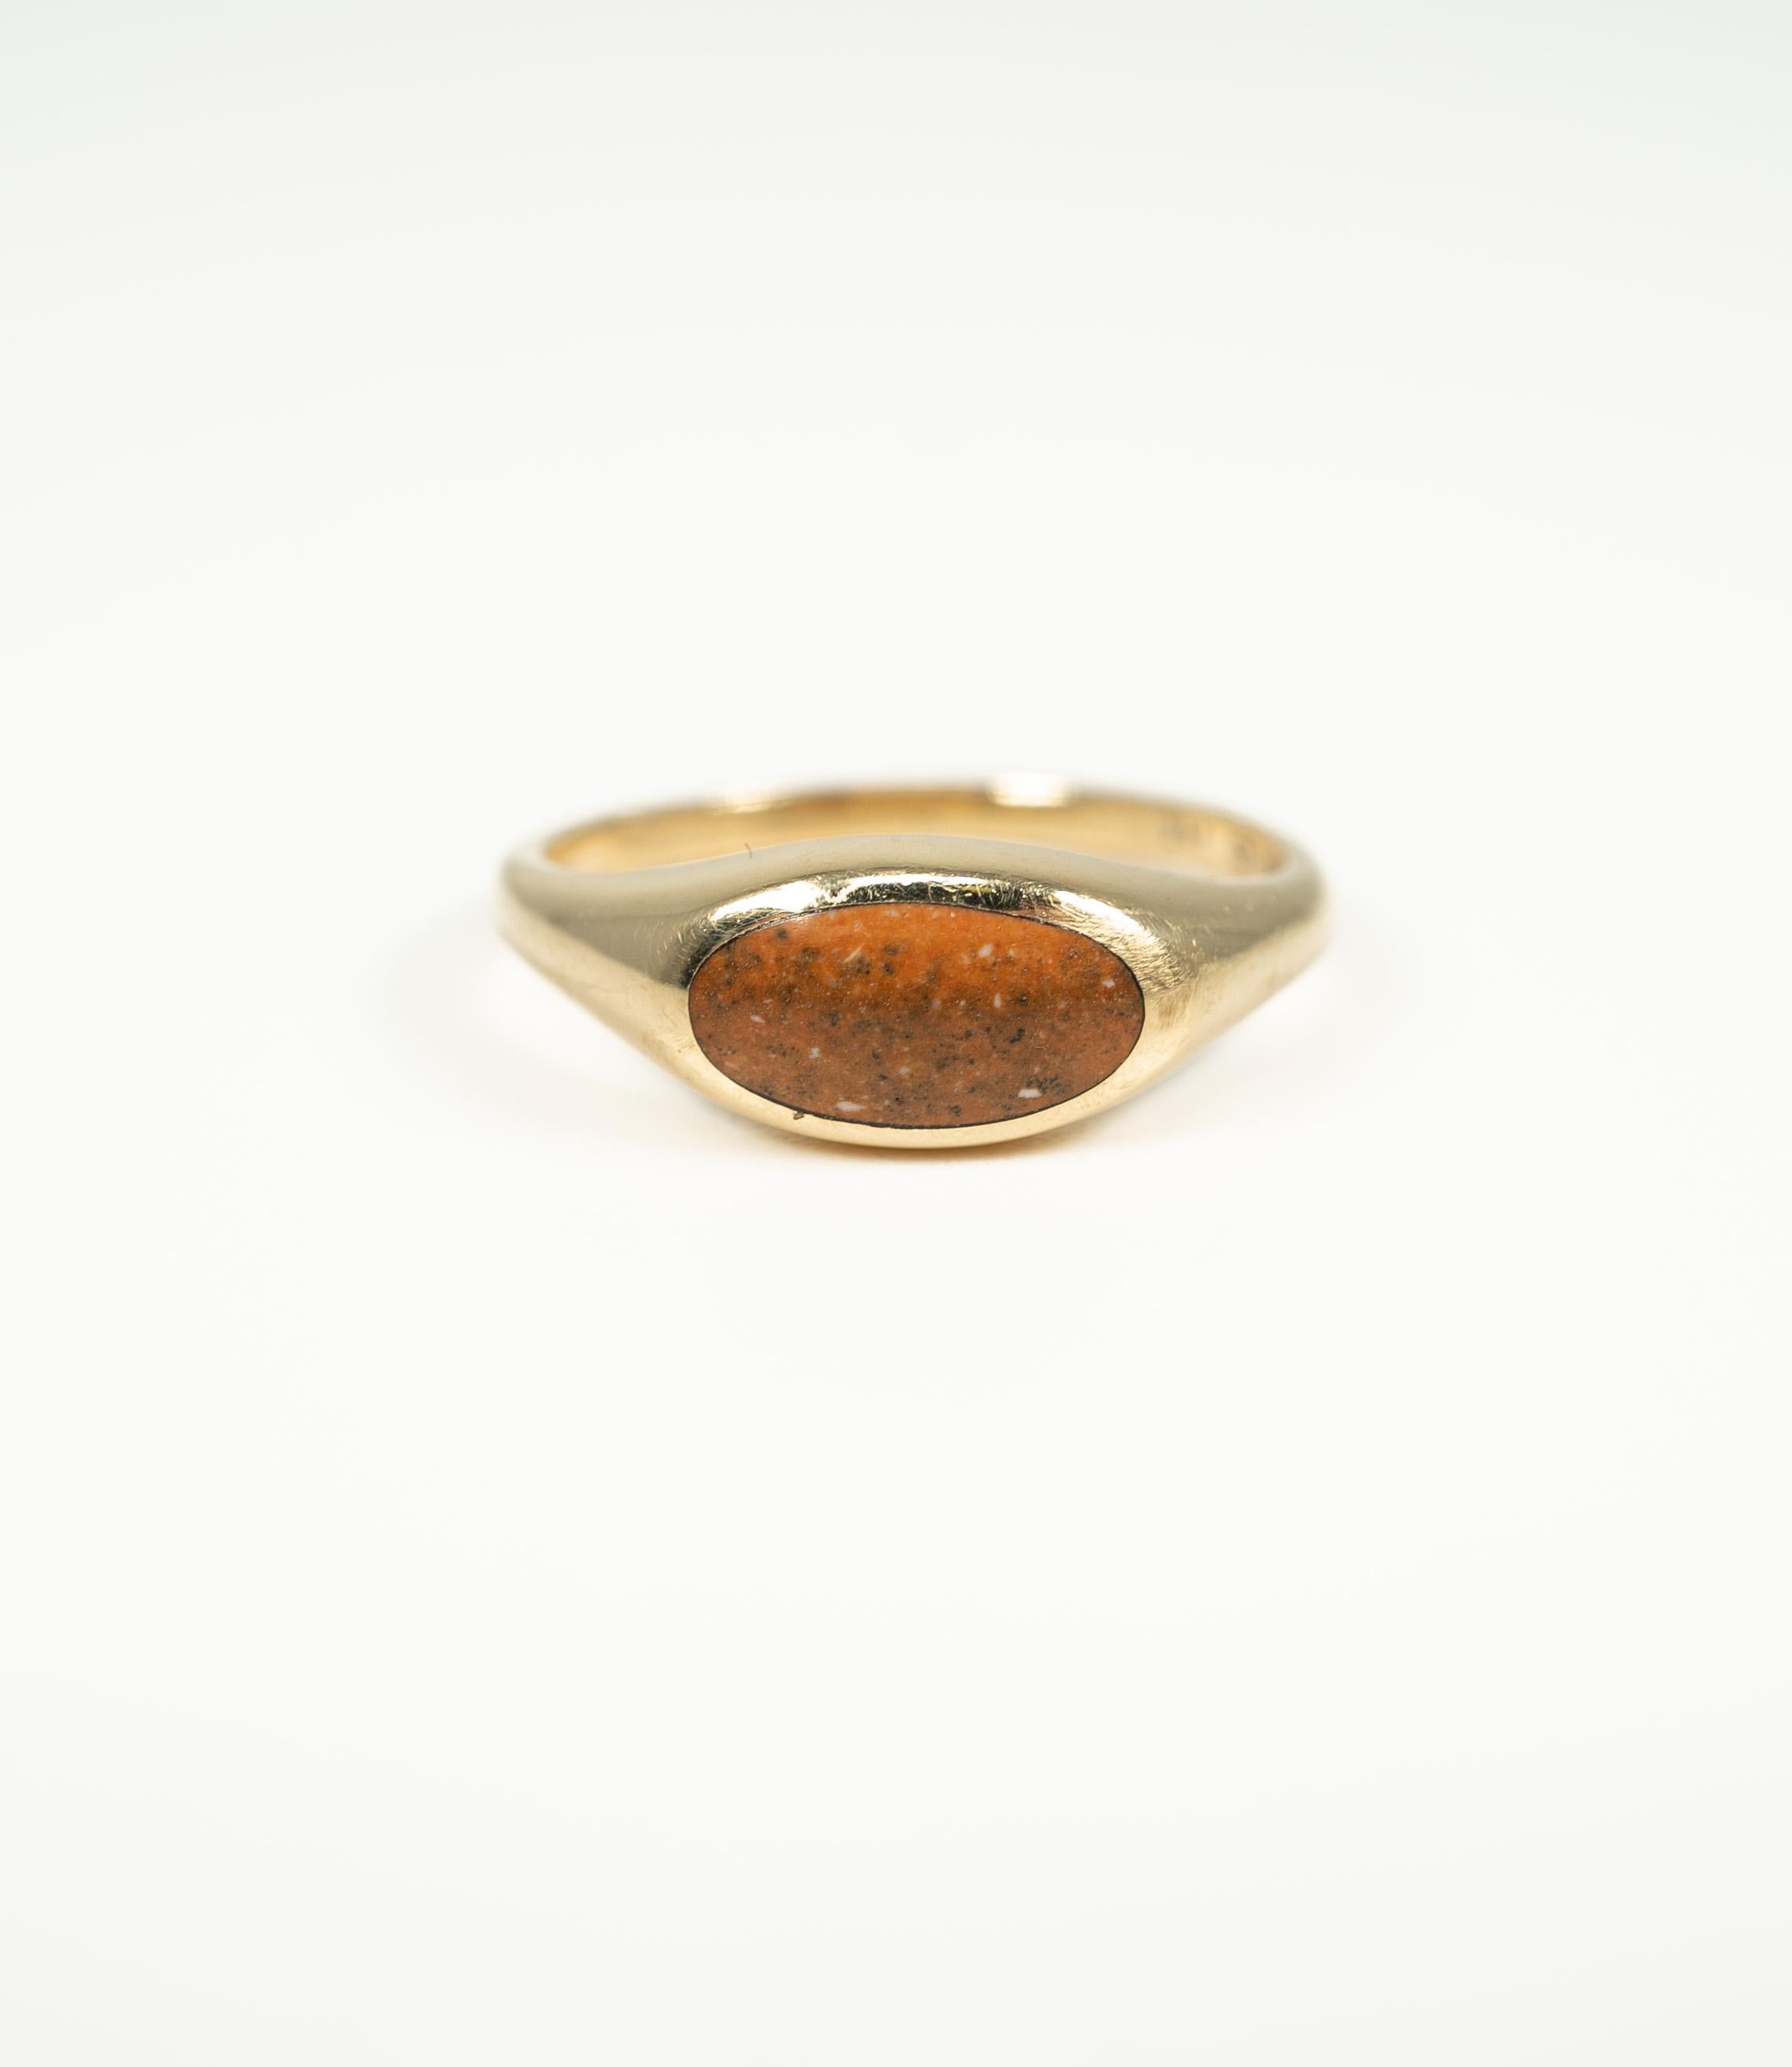 From designer Kabana, this 14 karat yellow gold ring features an oval horizontal inlay of Spiny Oyster!